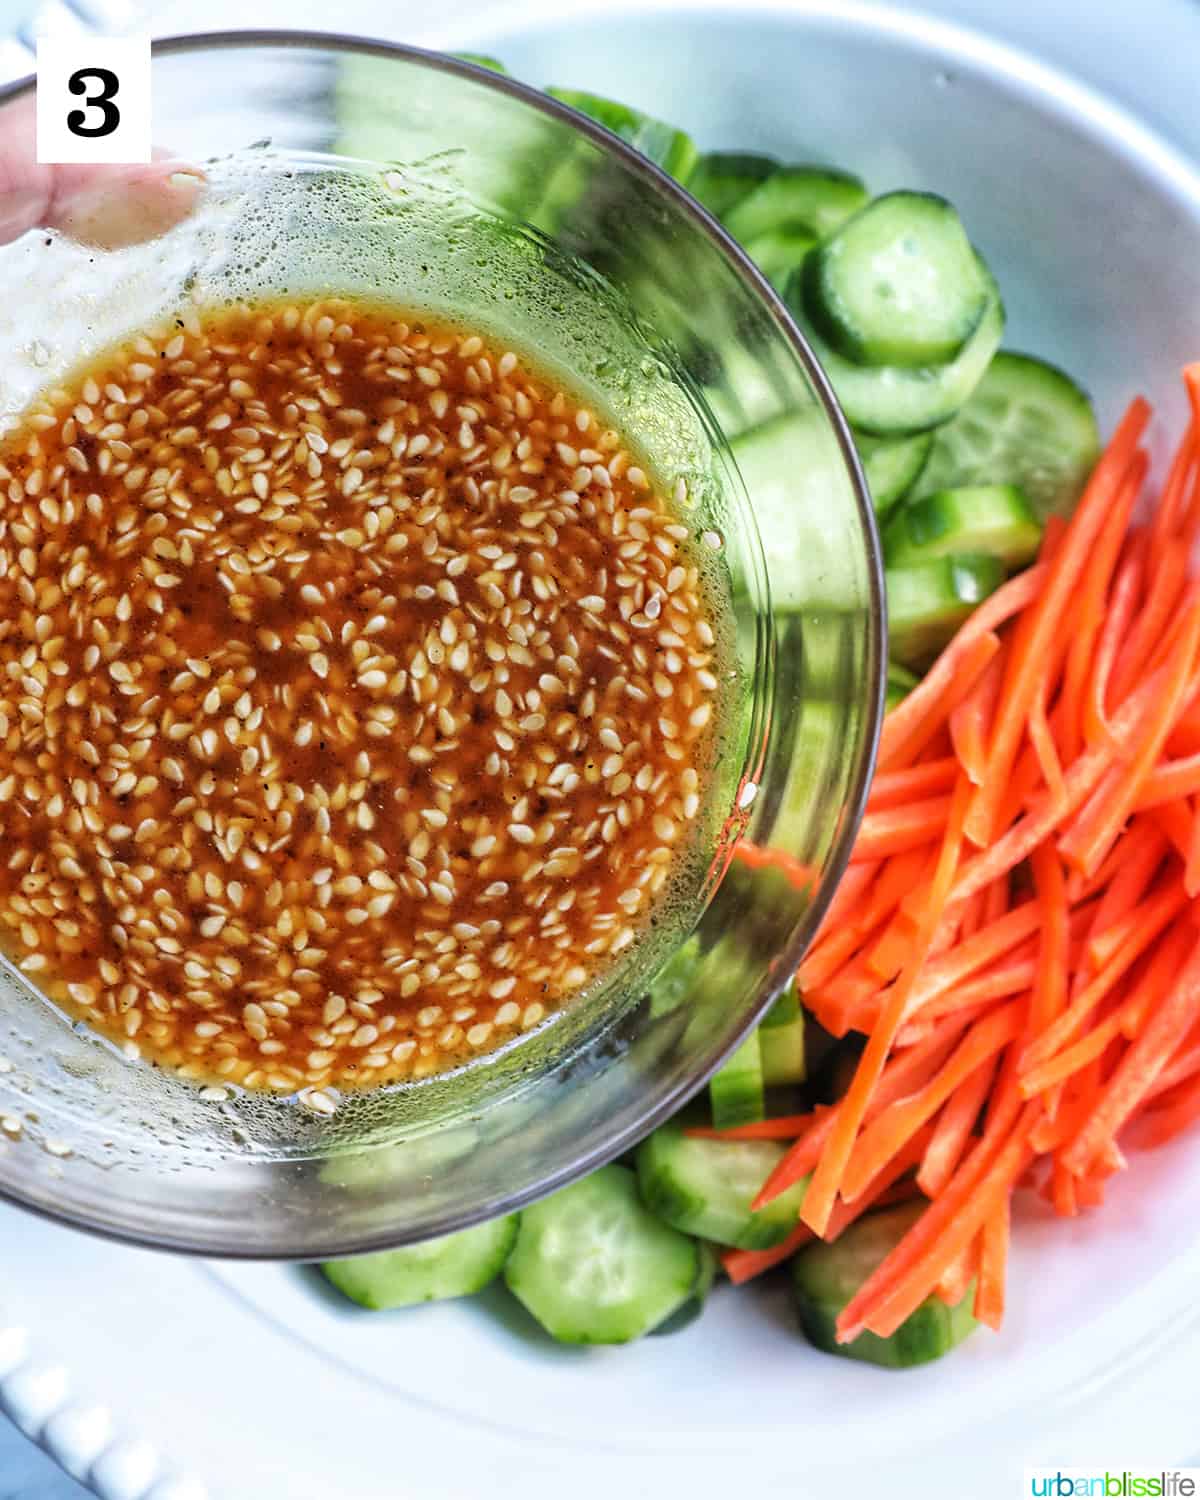 bowl of sauce over bowl of carrots and cucumbers.